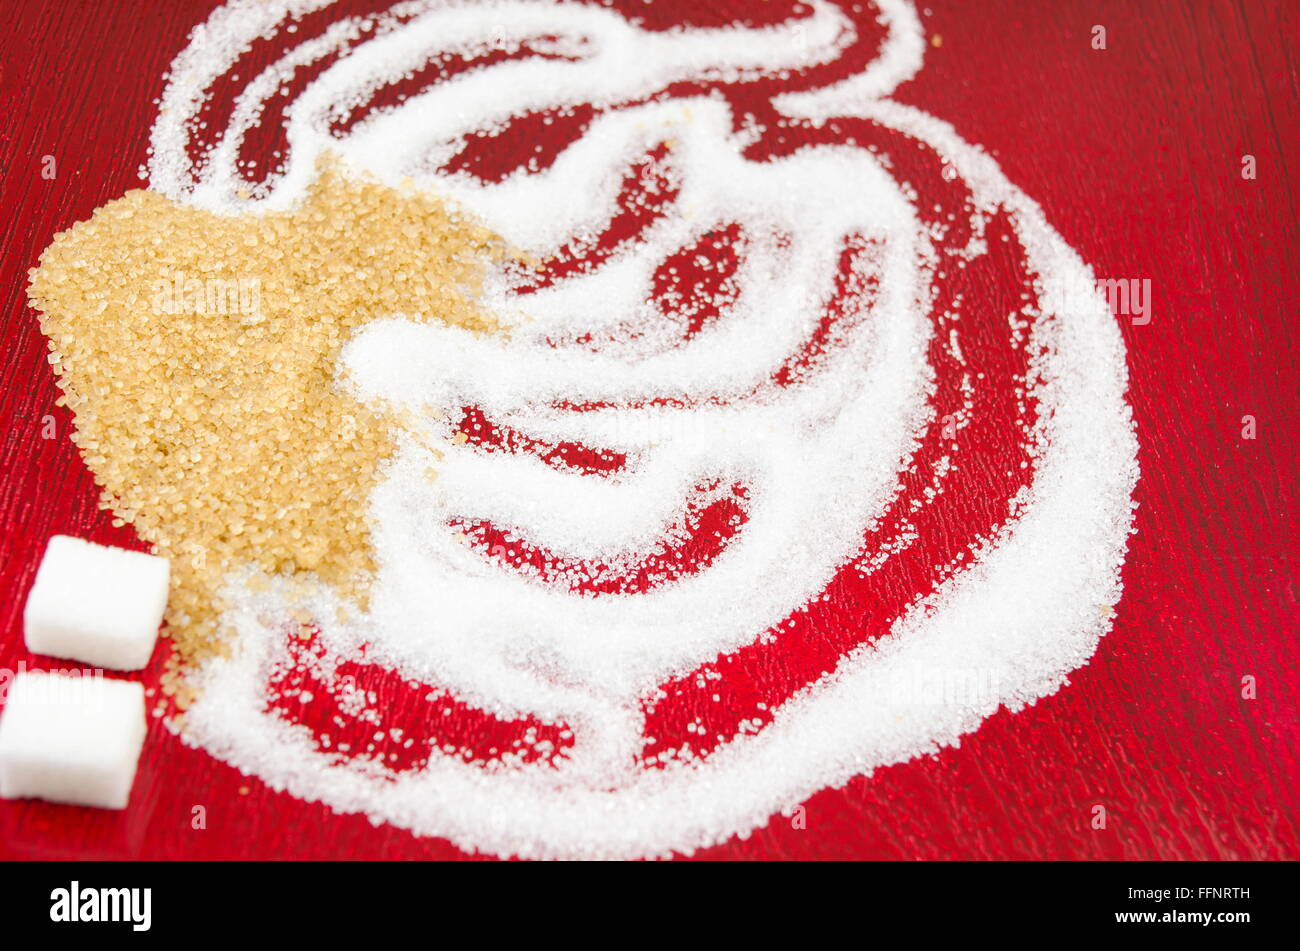 White and brown sugar shapes  on red background Stock Photo